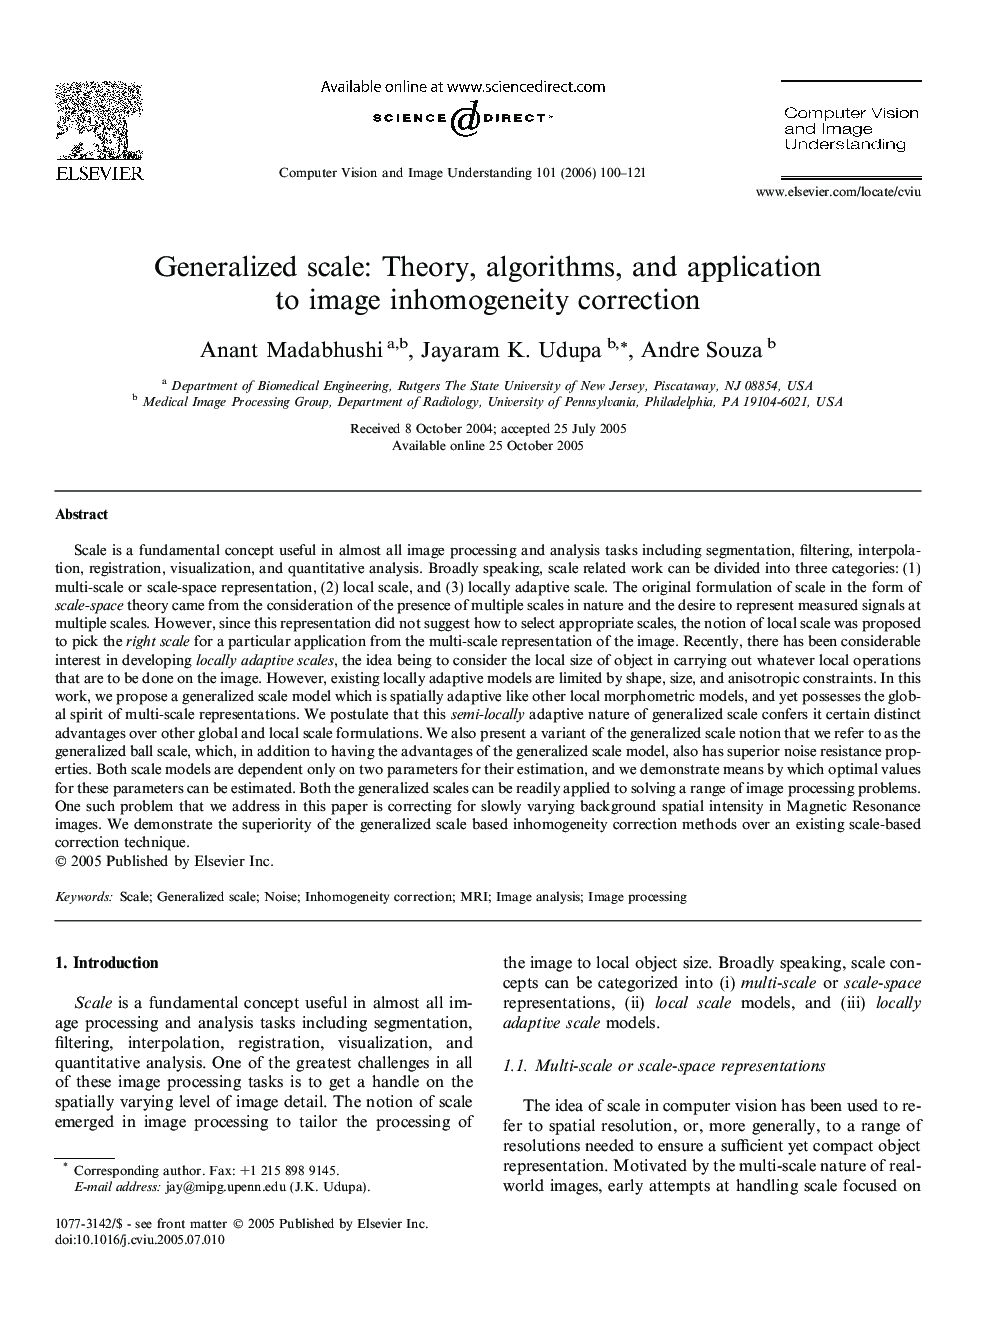 Generalized scale: Theory, algorithms, and application to image inhomogeneity correction